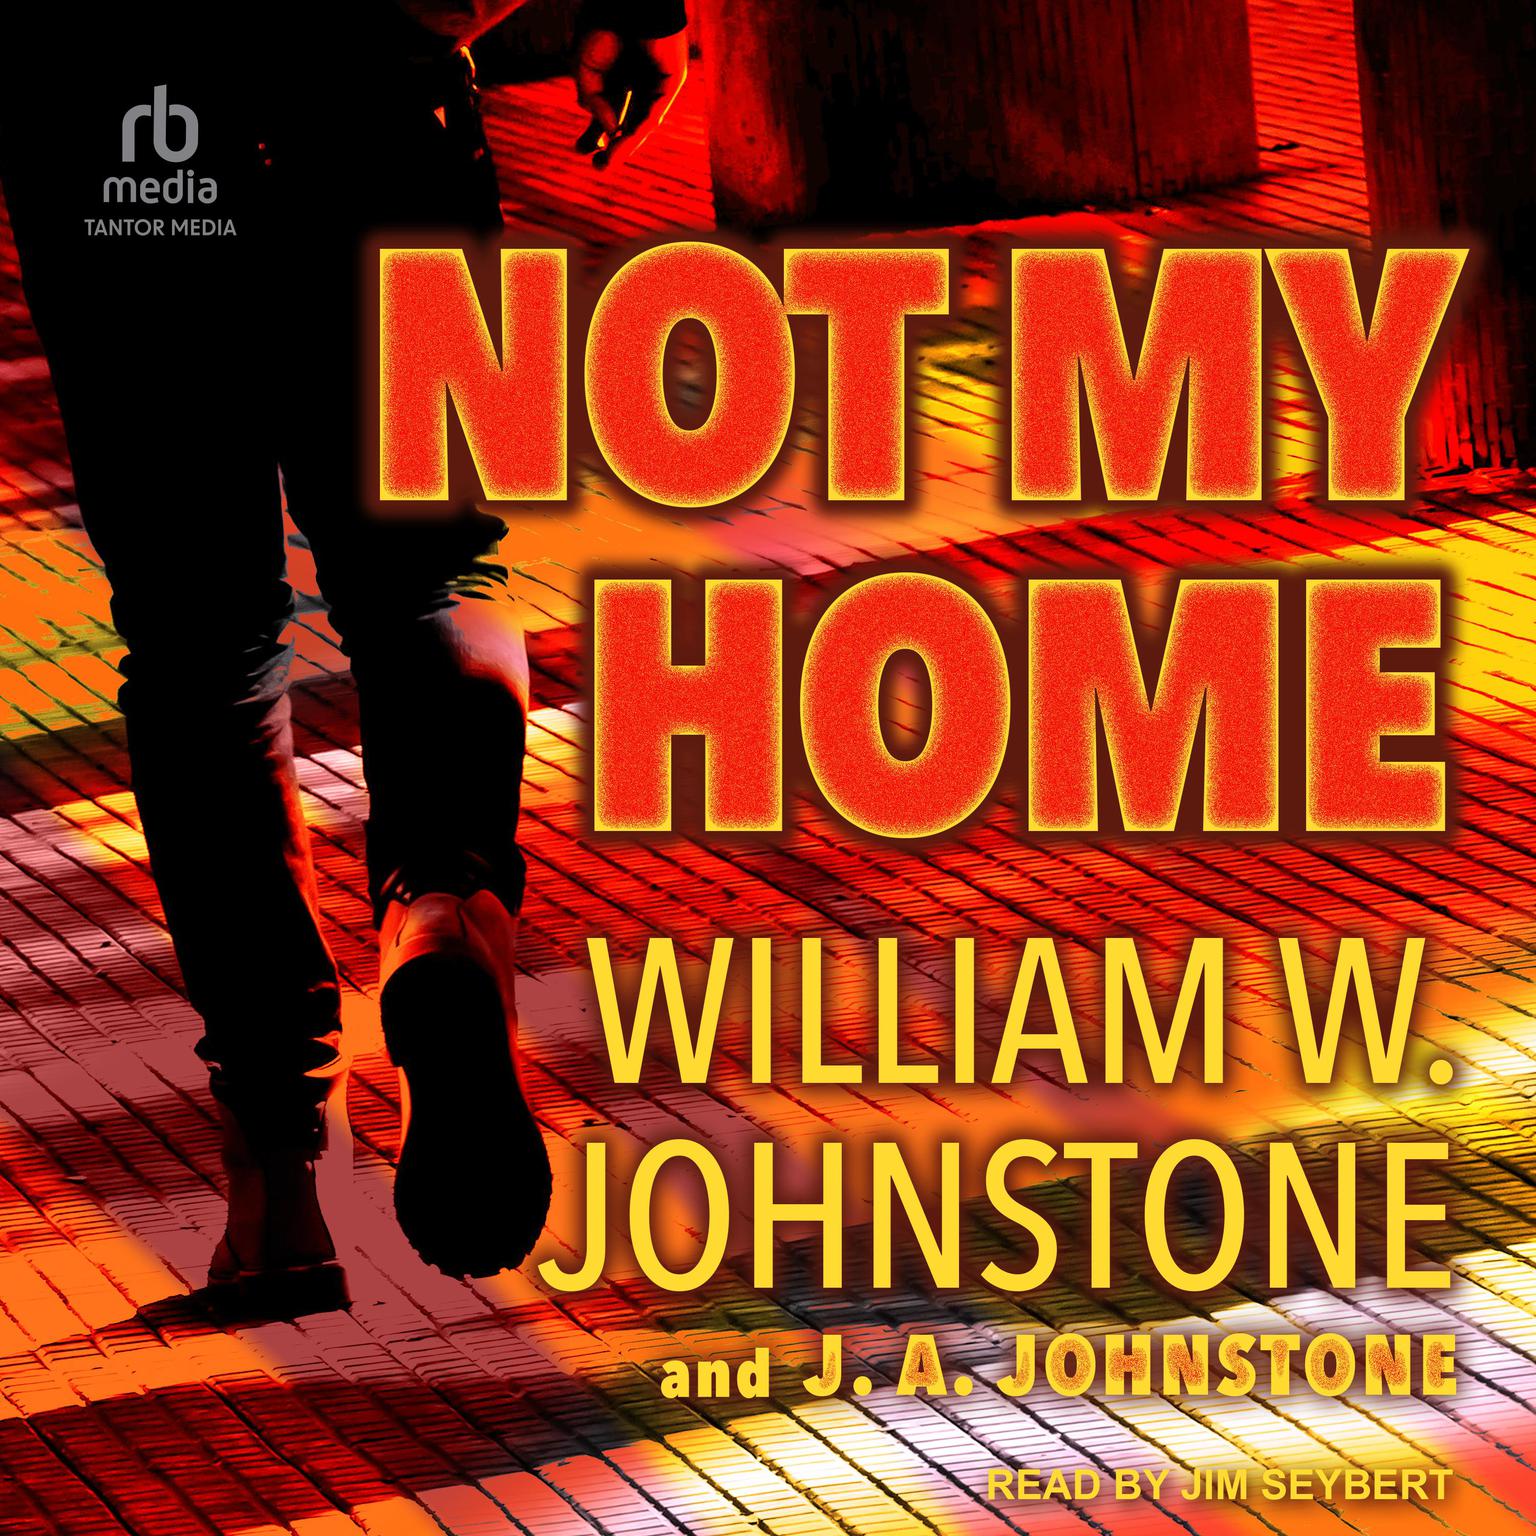 Not My Home Audiobook, by William W. Johnstone